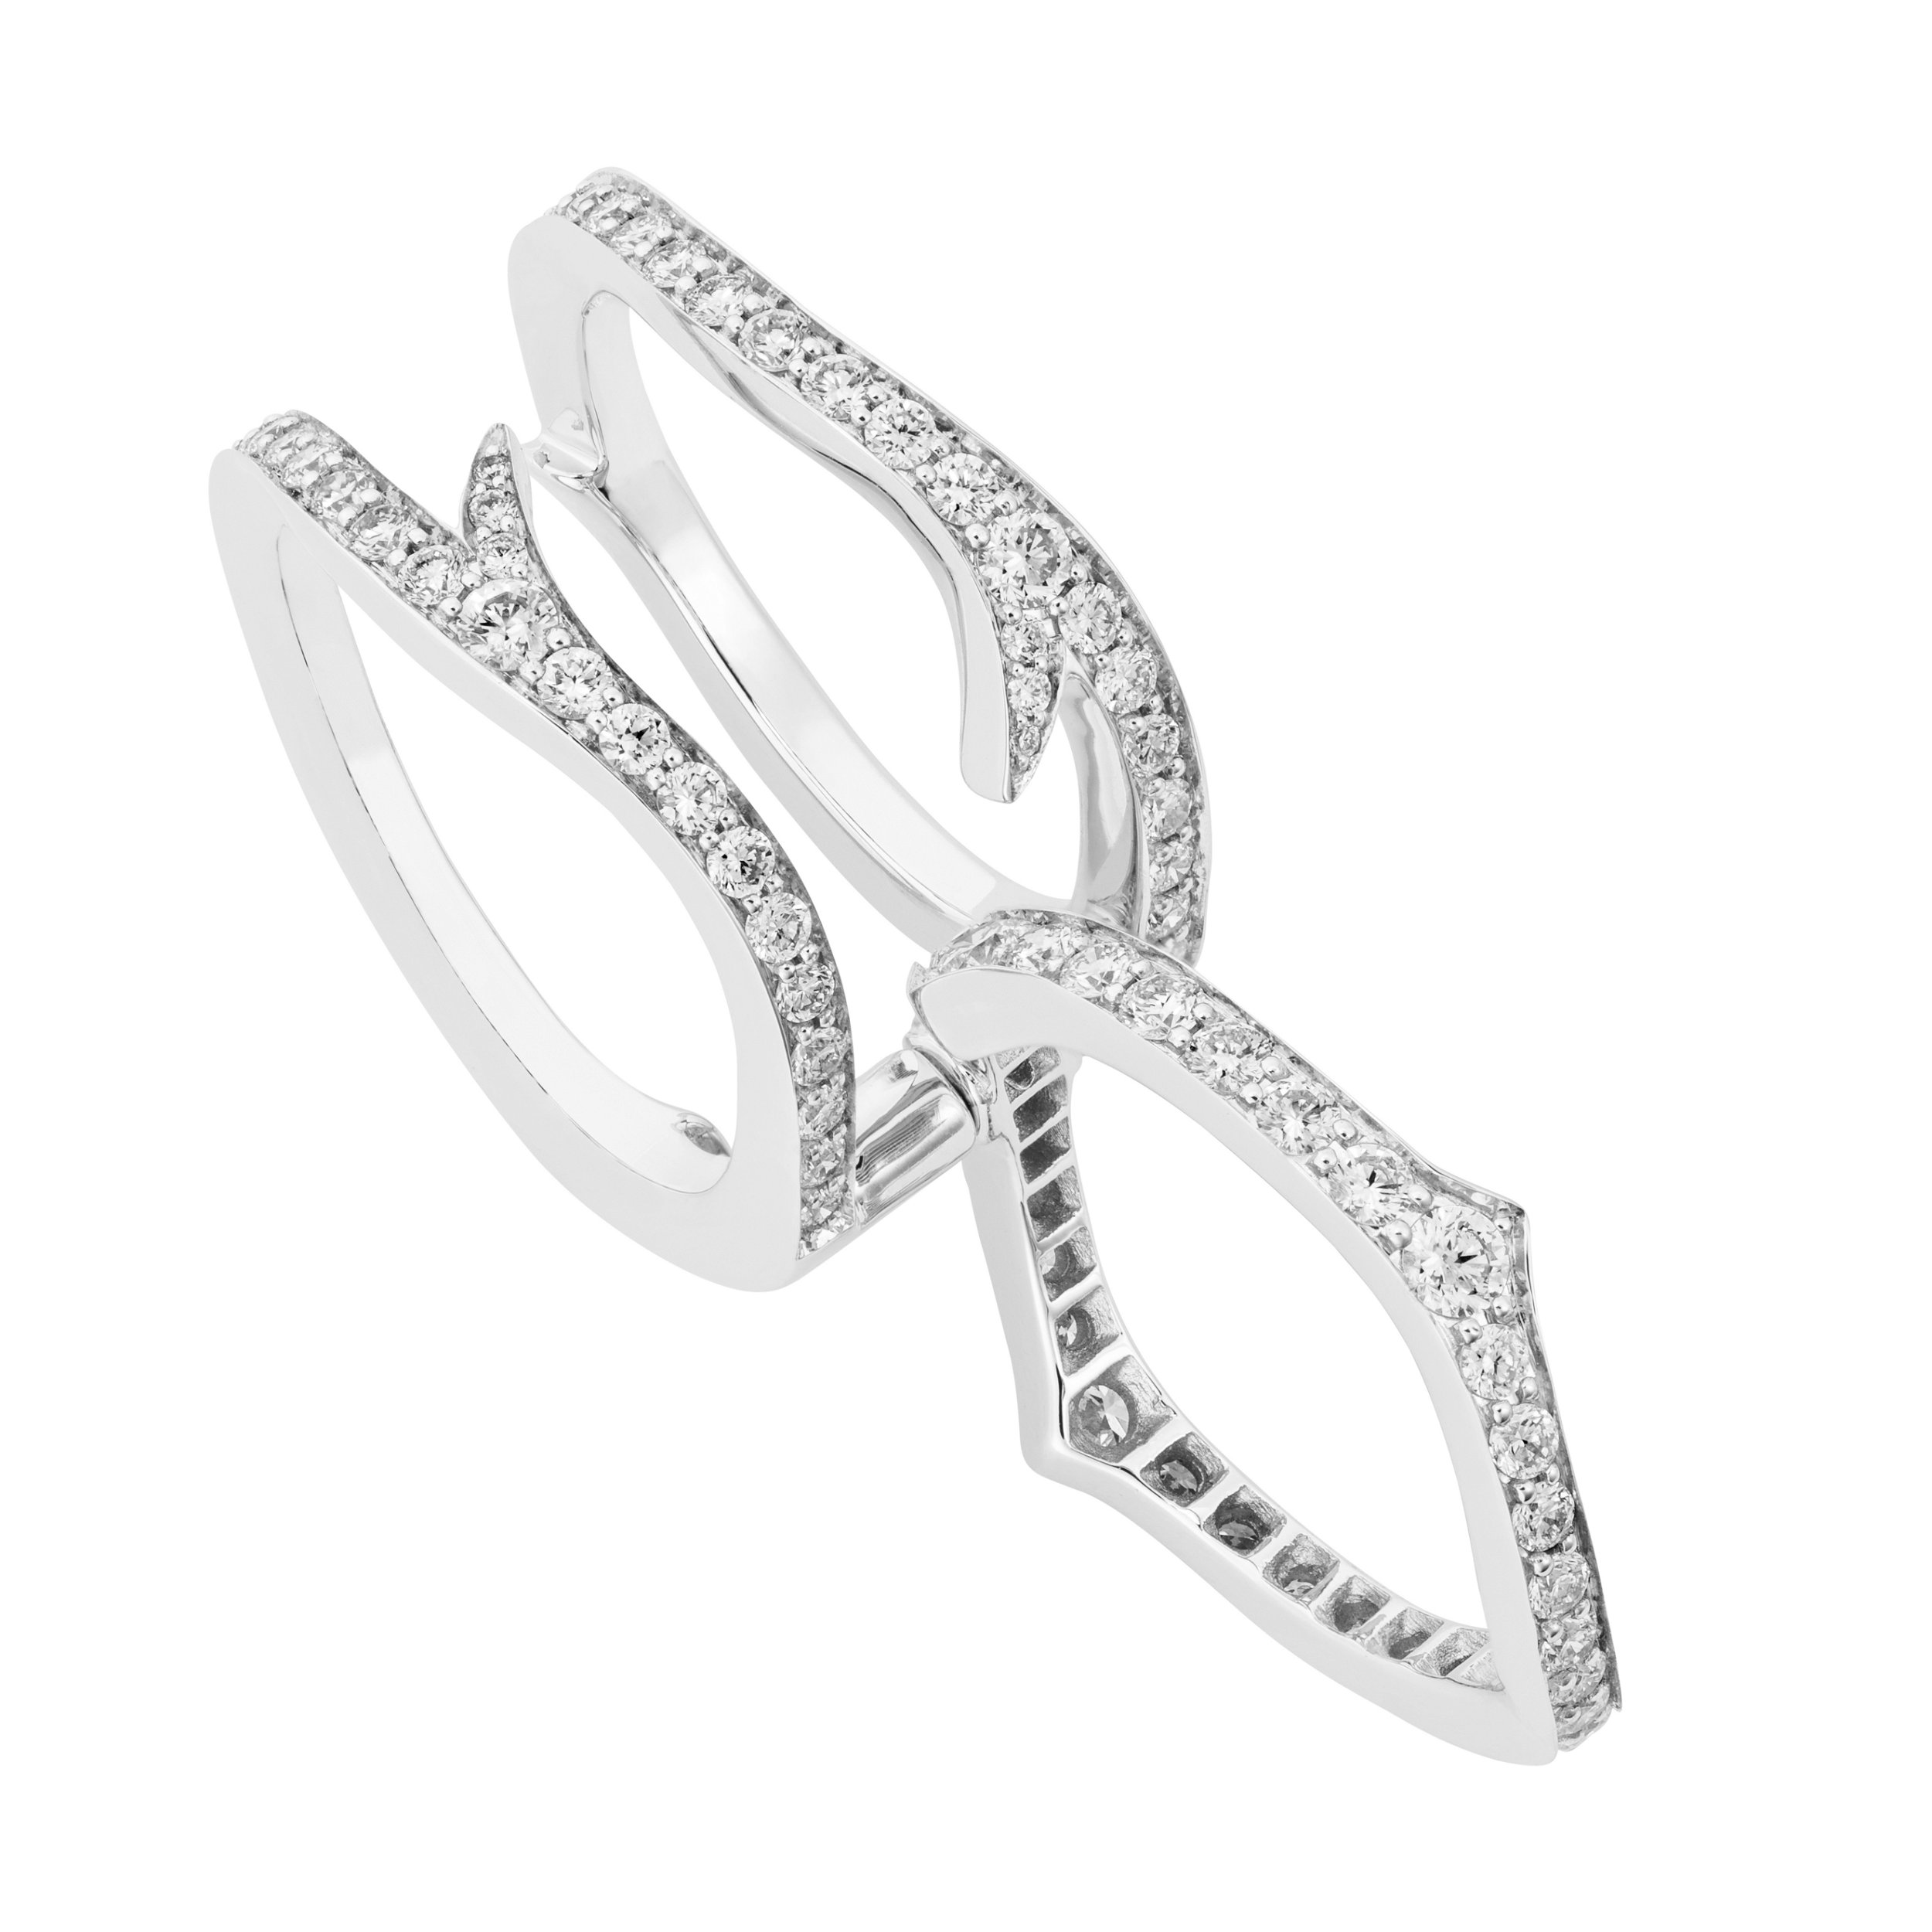 Thorn Convertible Ring with White Diamonds in 18kt White Gold